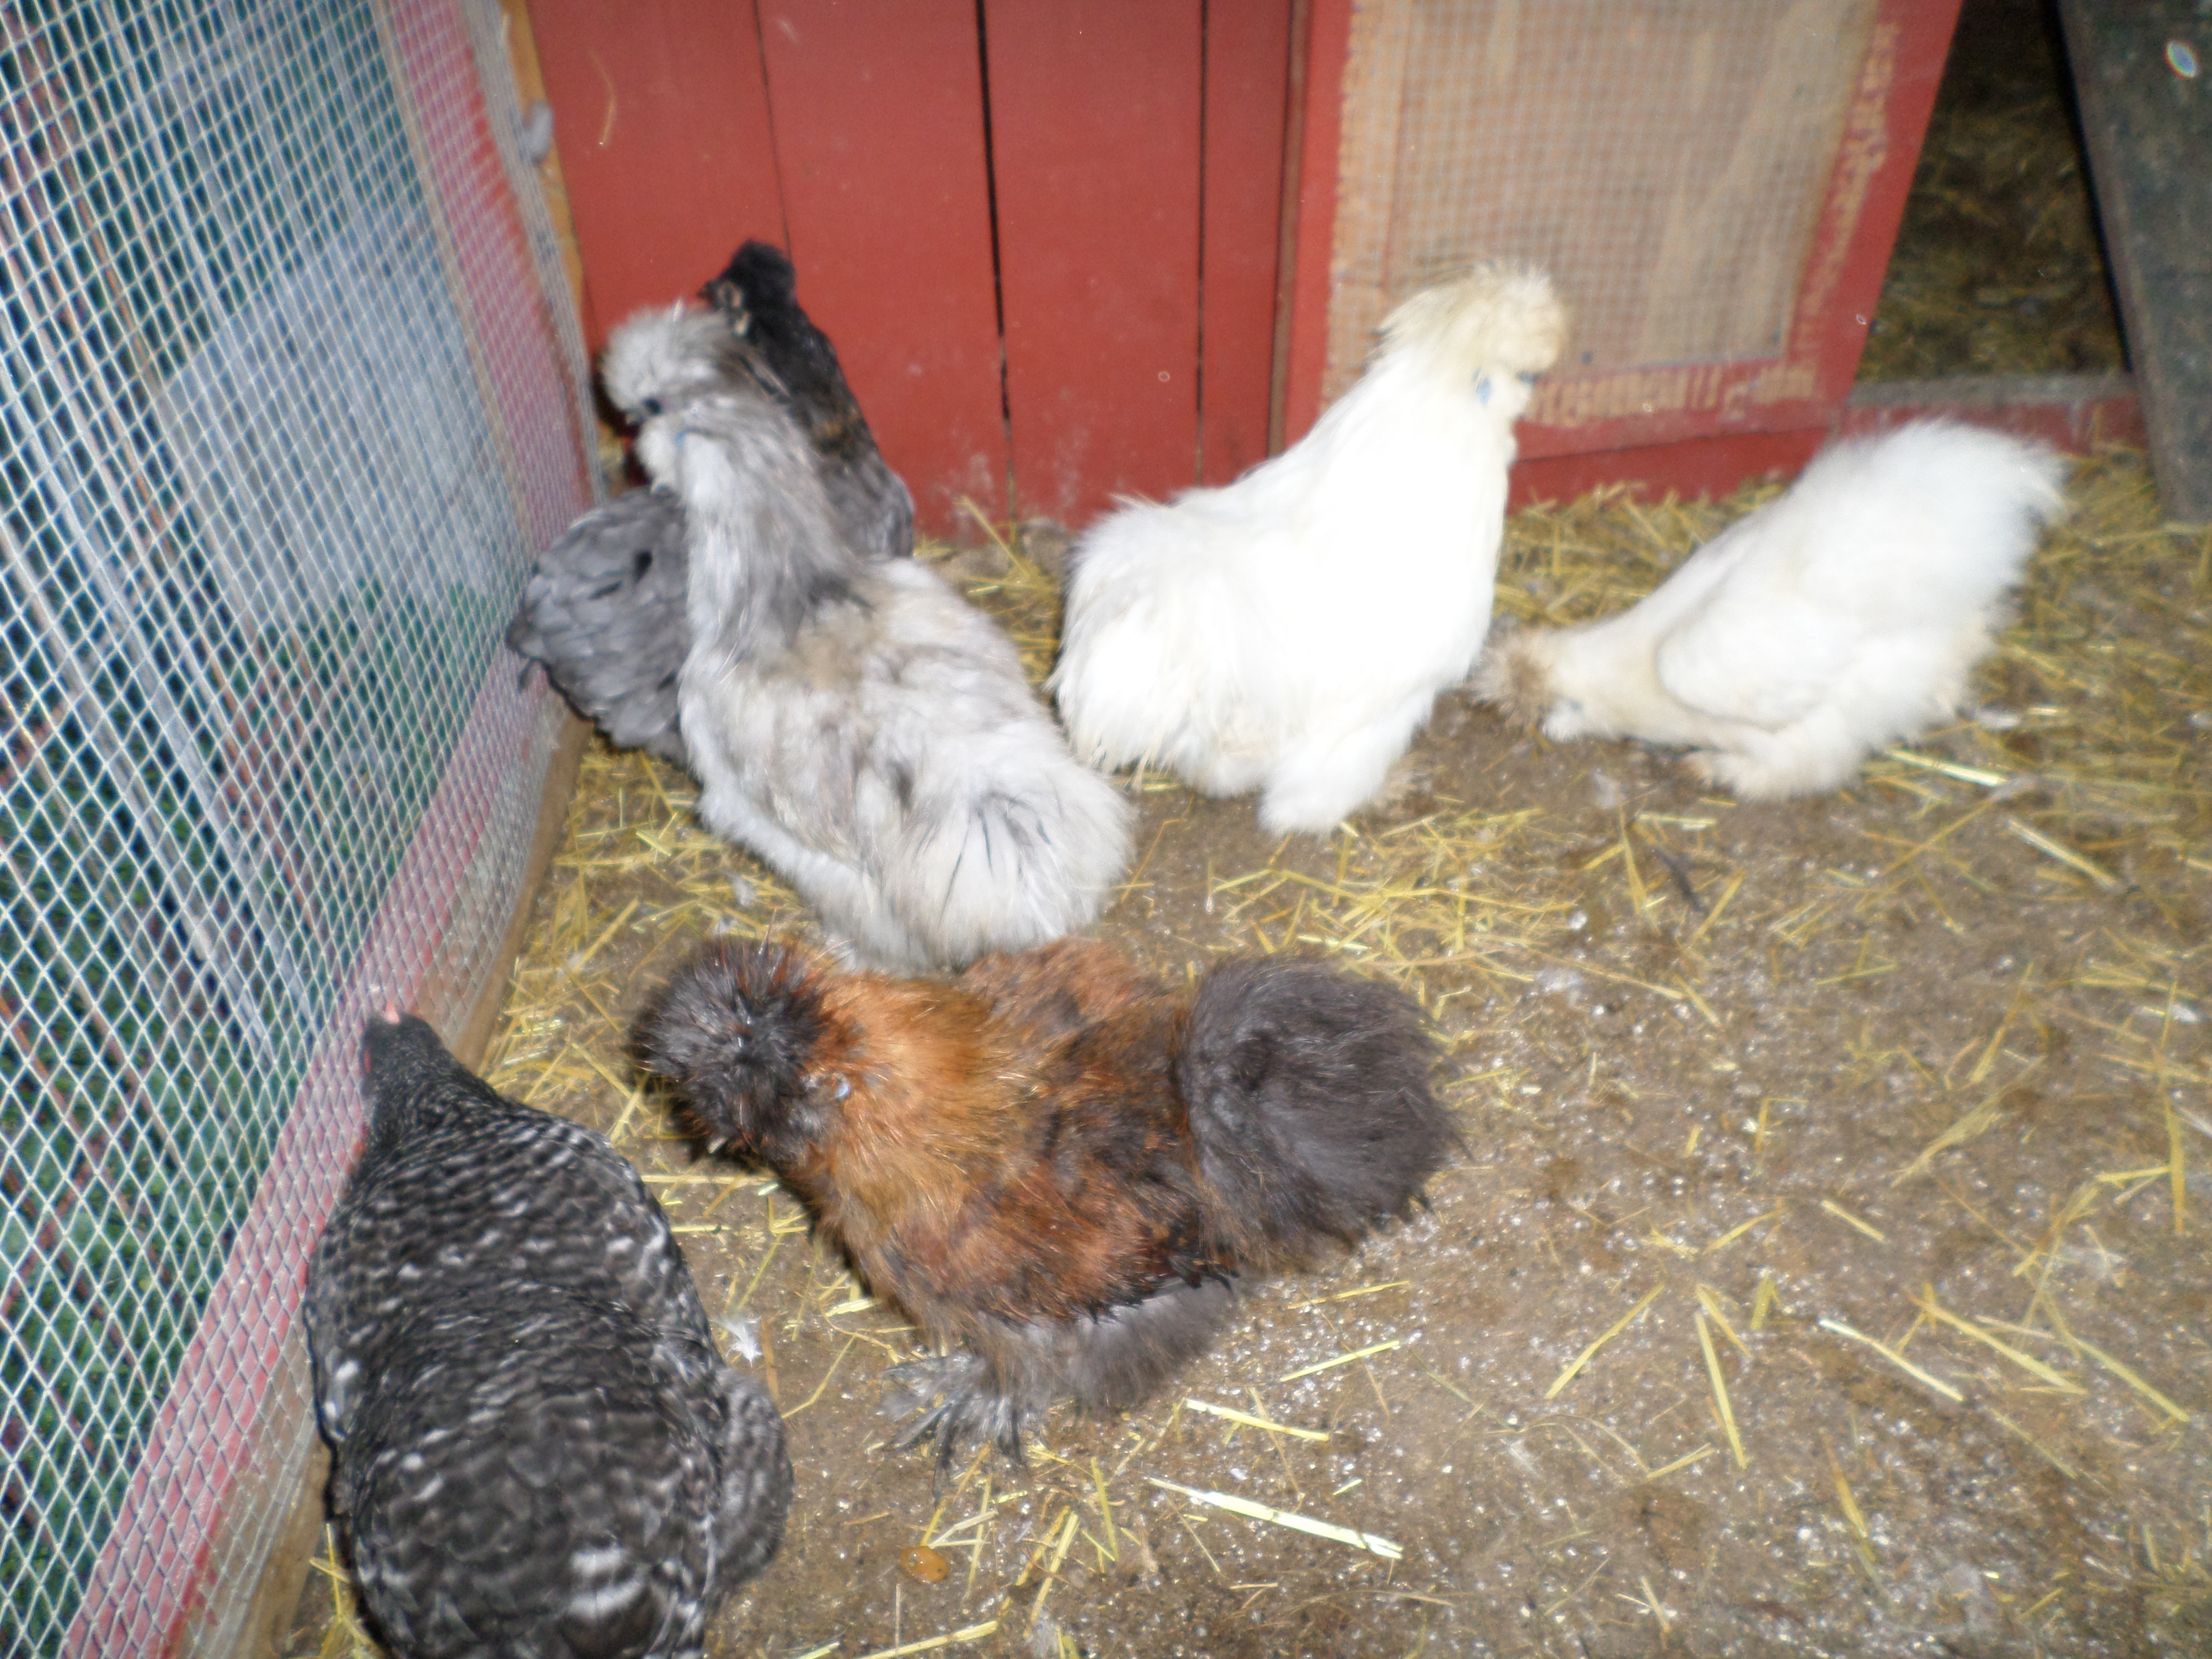 Some of my chickens